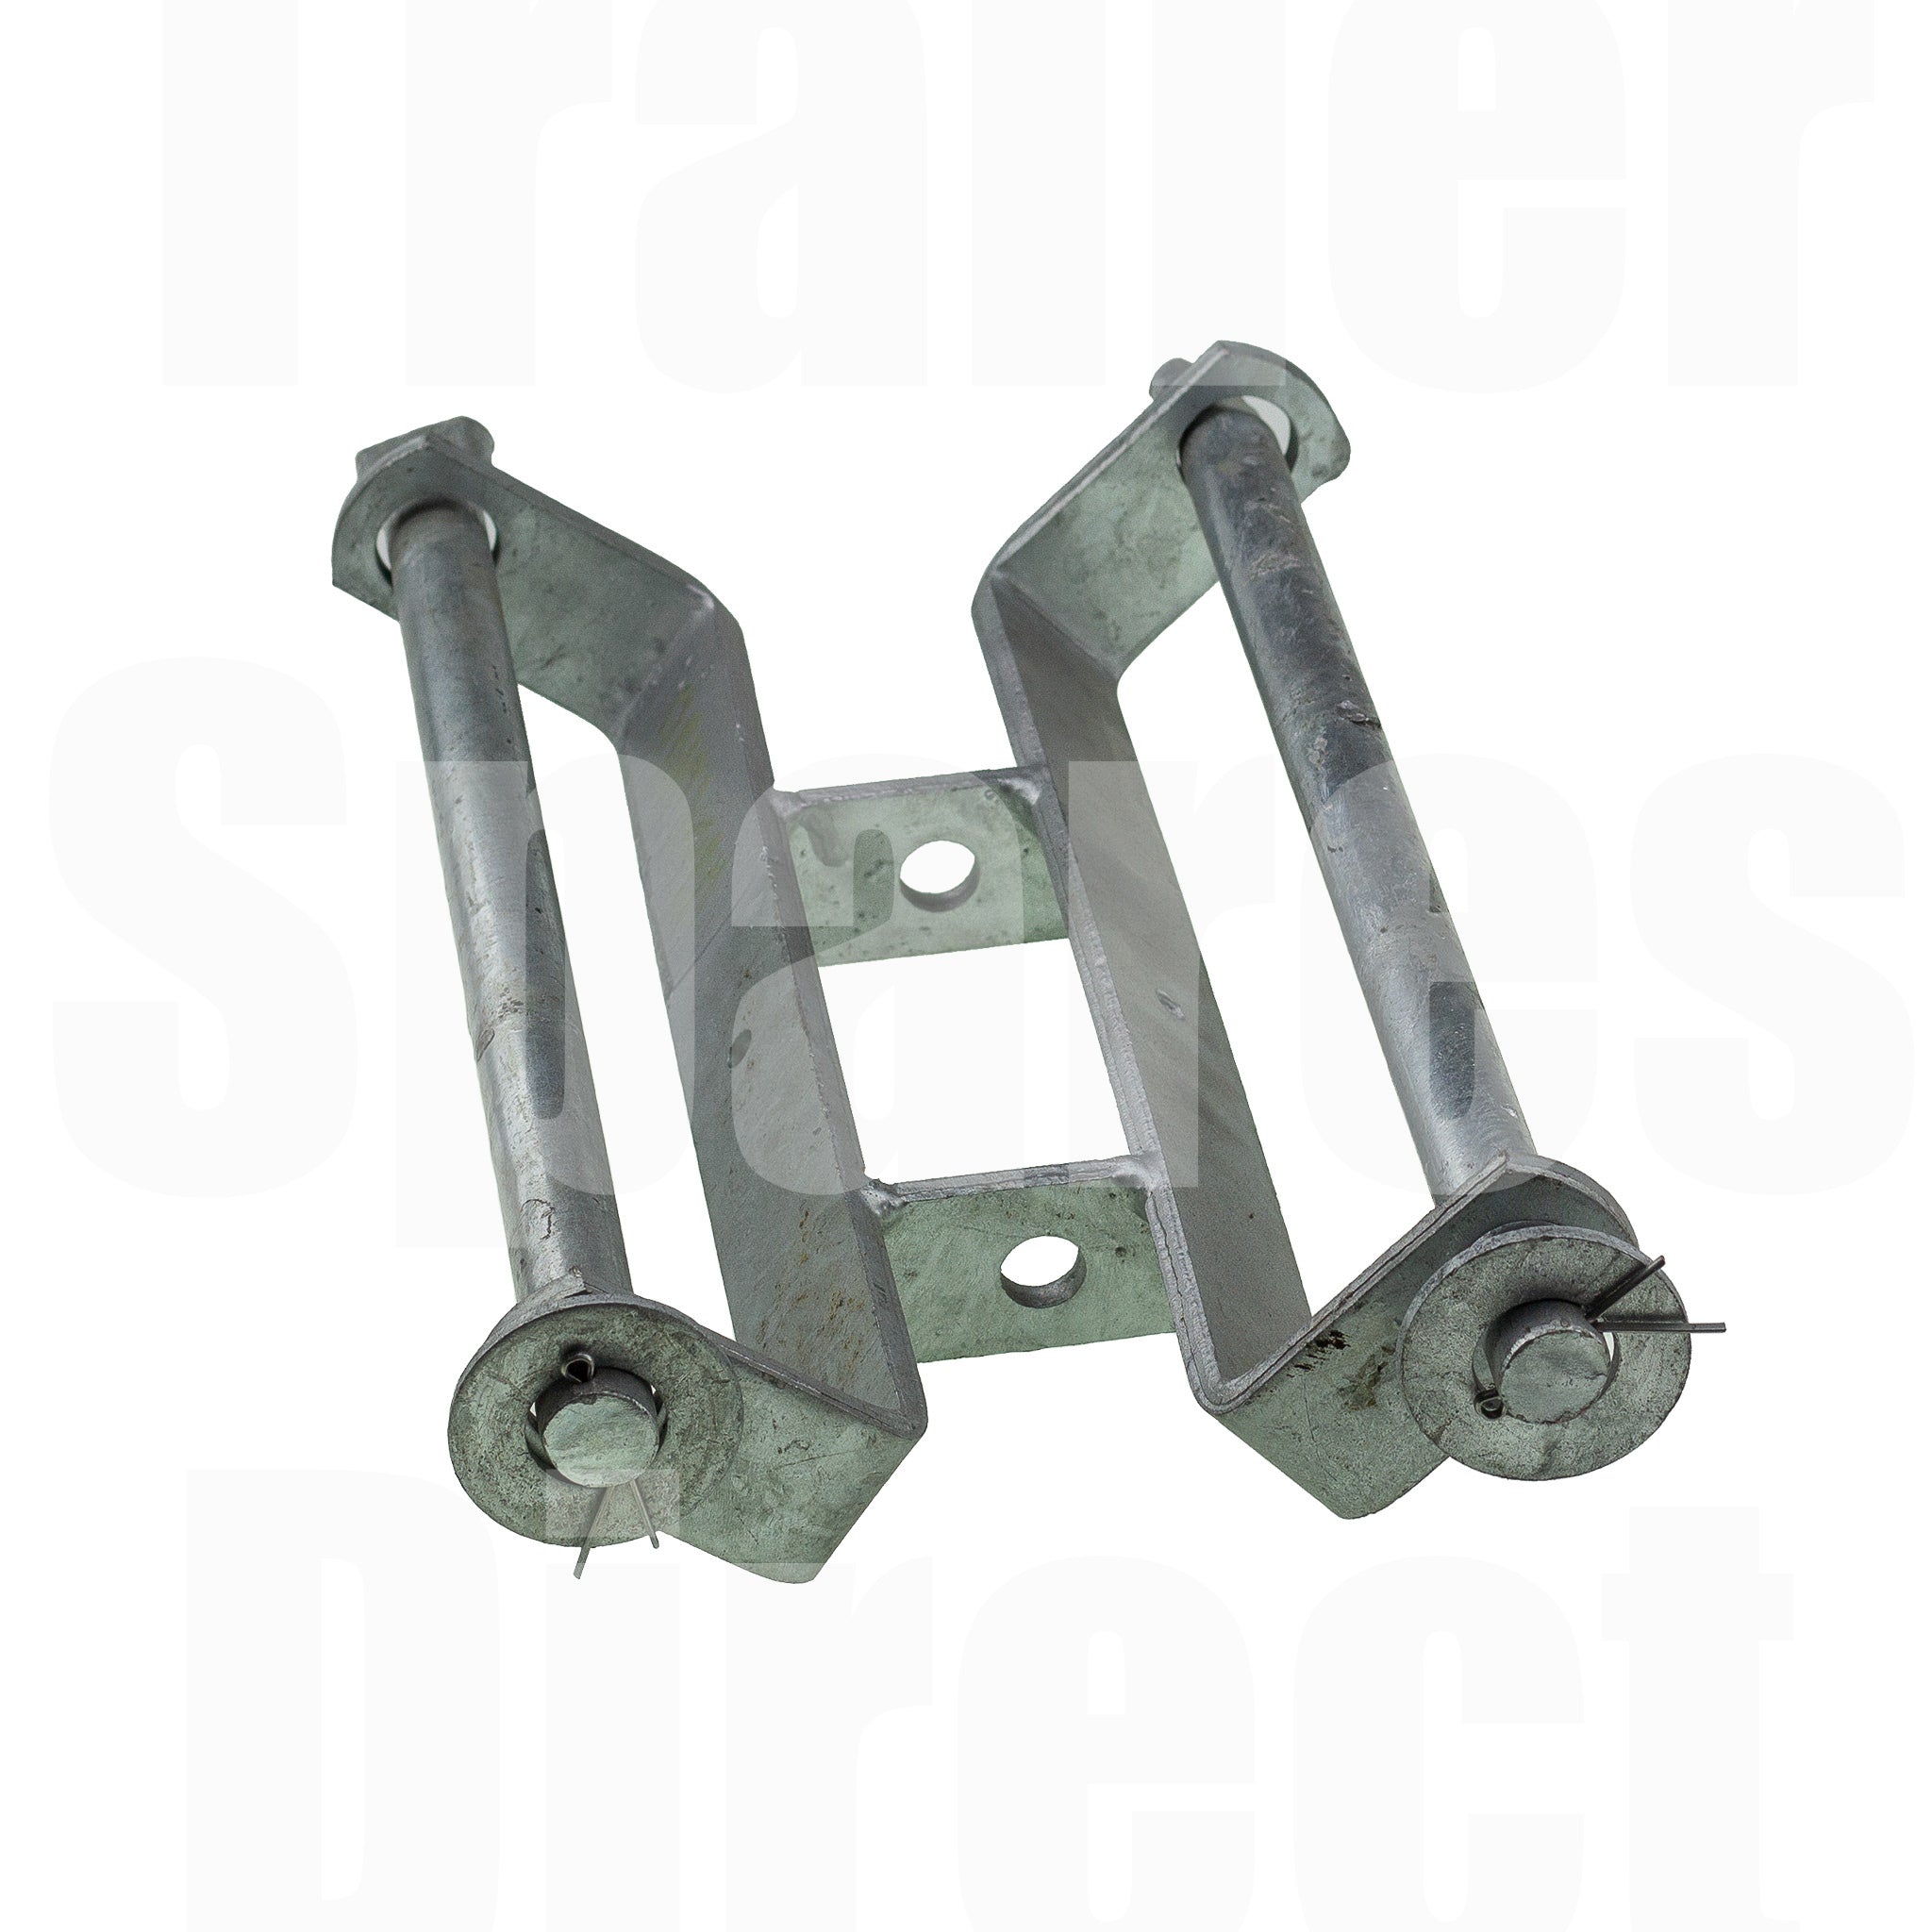 Double Roller Bracket 12 inch Galvanised includes Spindles